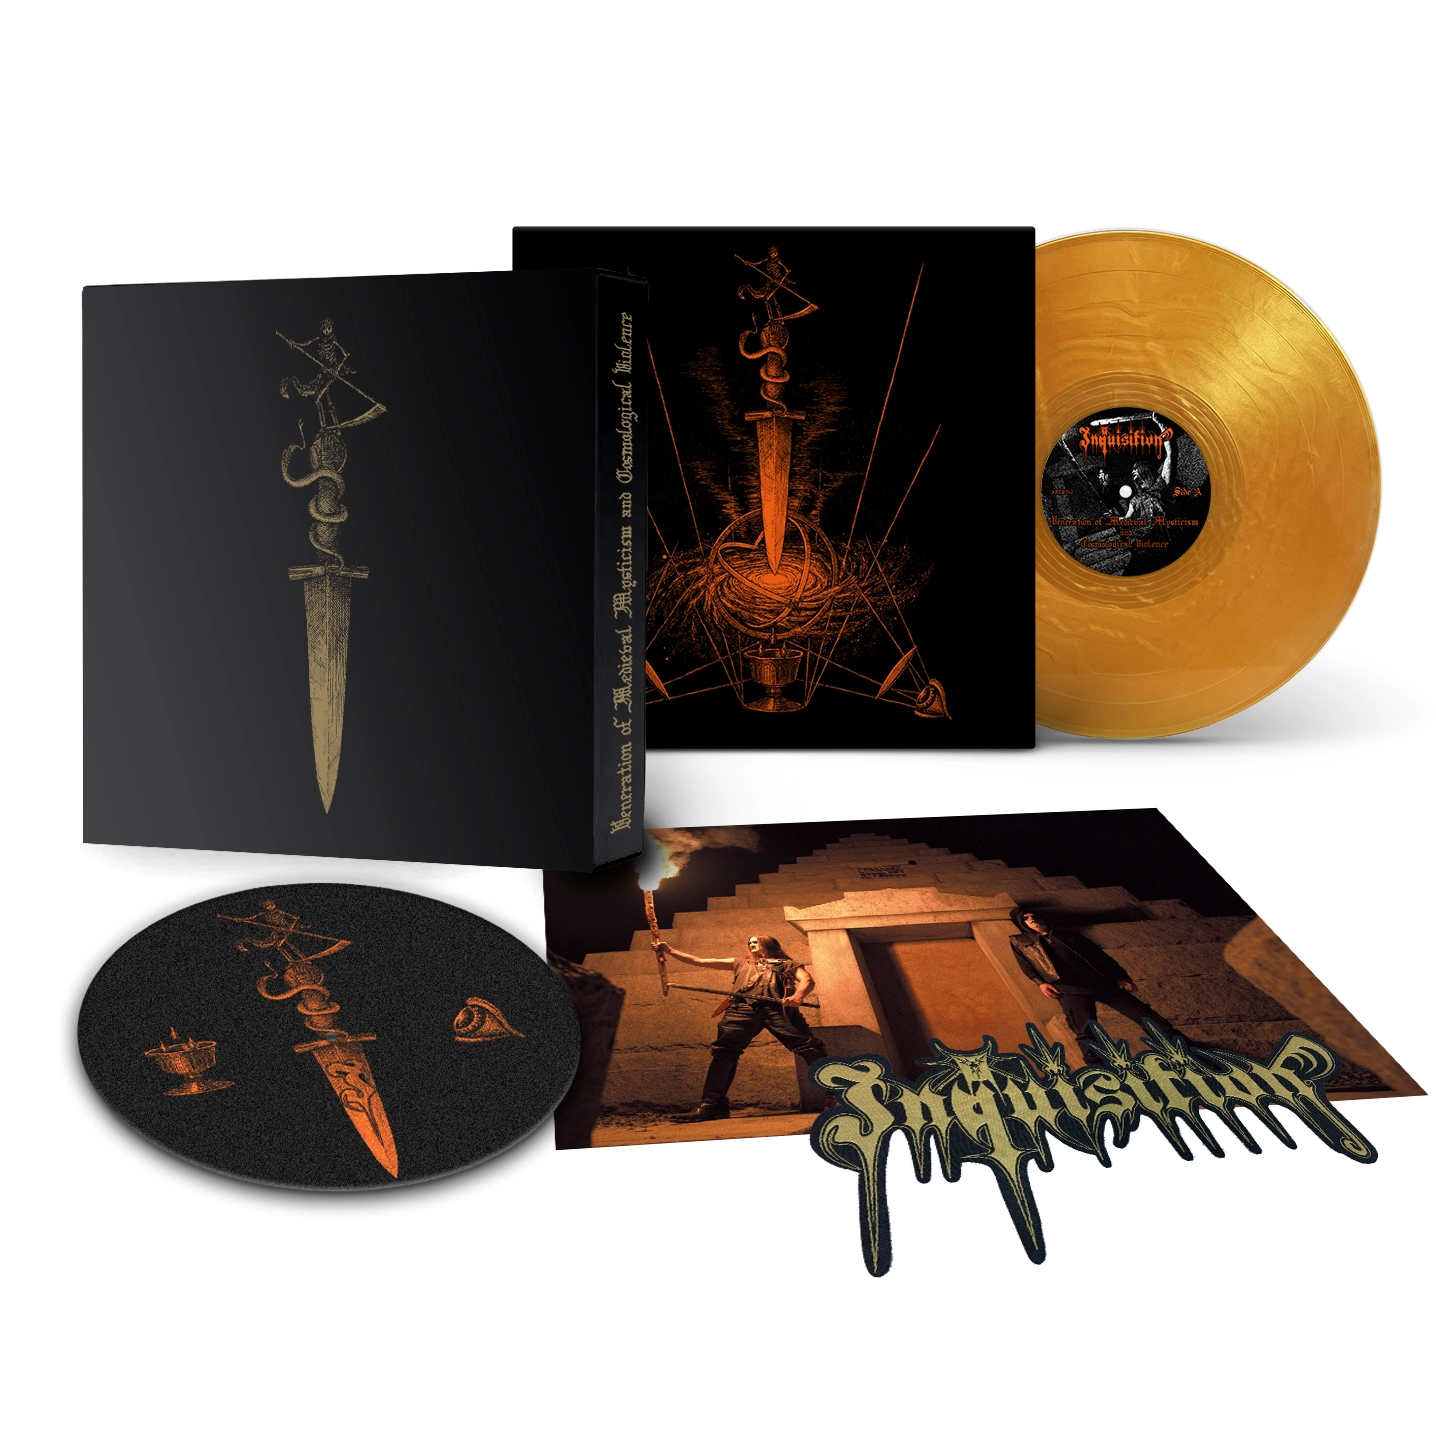 INQUISITION - Veneration of Medieval Mysticism and Cosmological Violence [LP BOXSET]